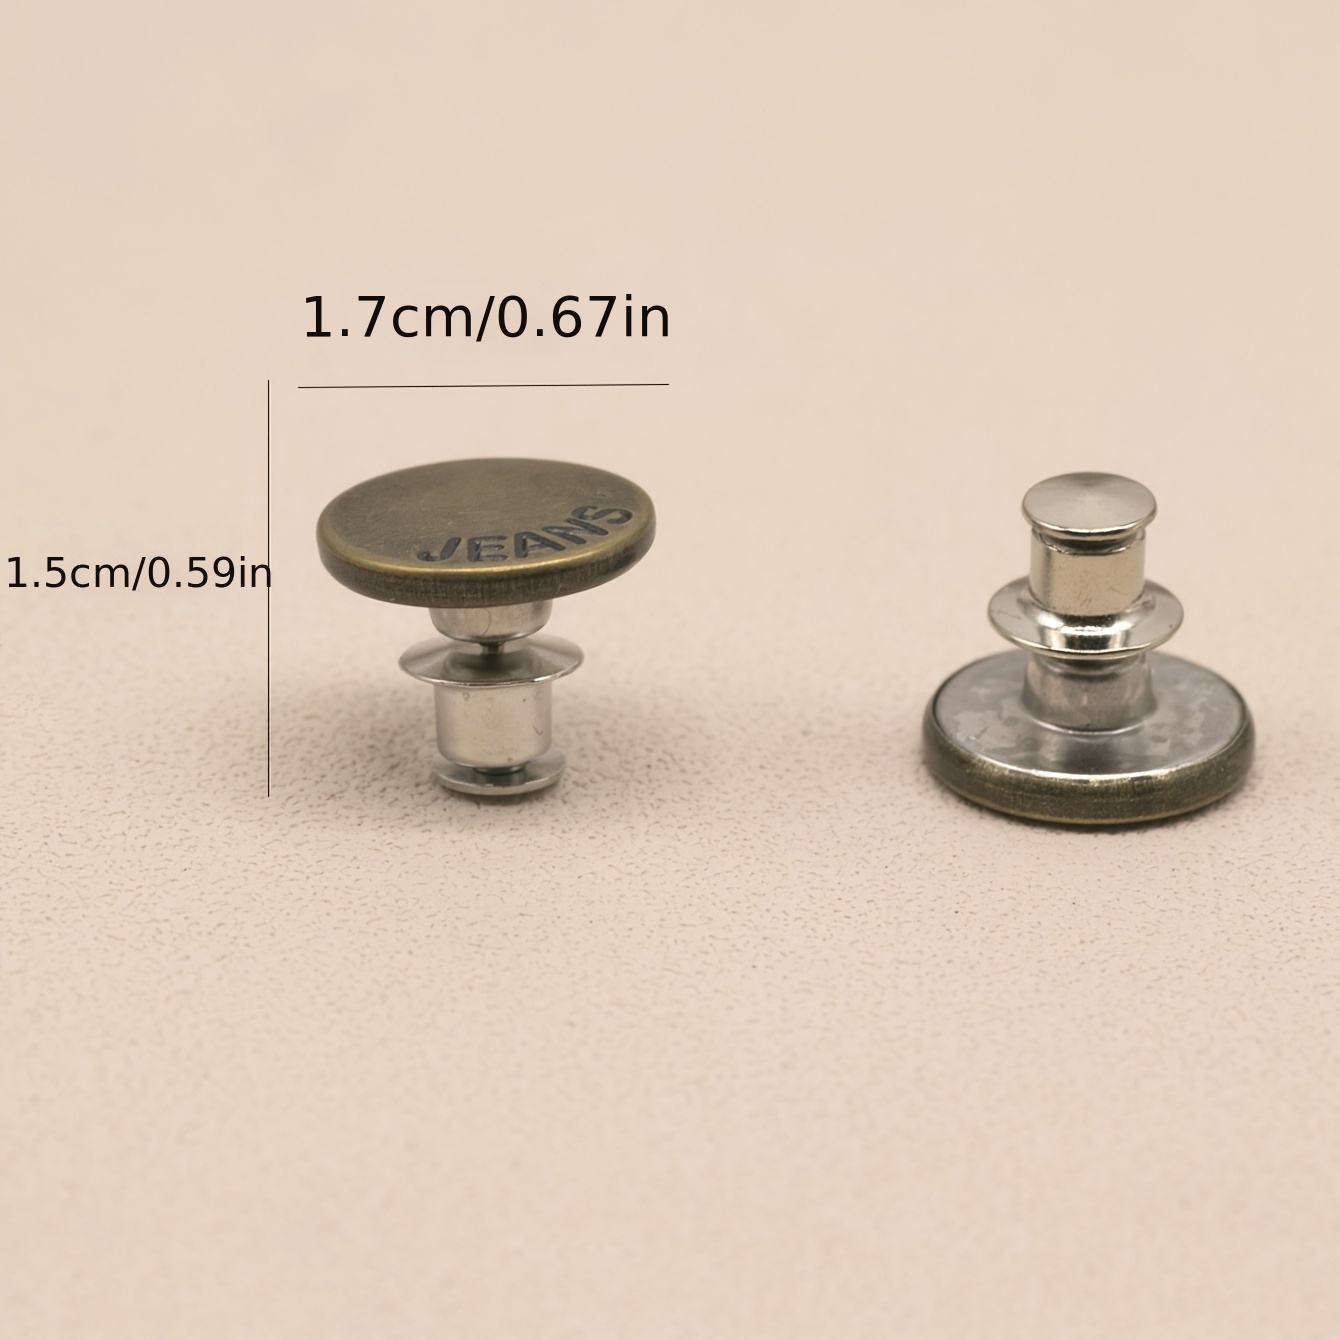 5Pcs Snap Fastener Metal Buttons for Clothing Jeans Perfect Fit Adjust  Button self Increase Reduce Waist